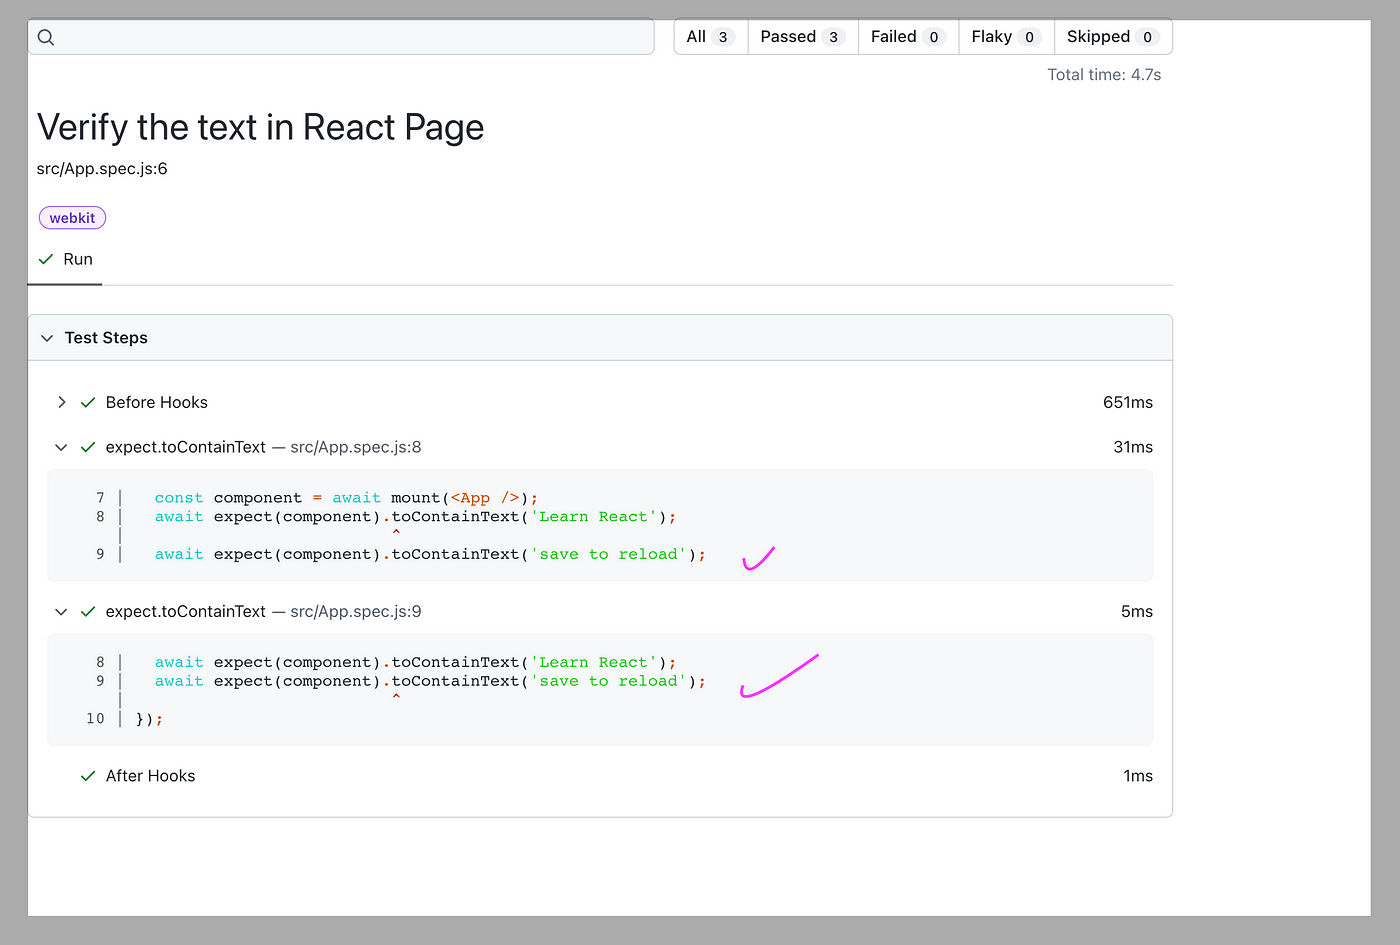 Verify the text in React Page